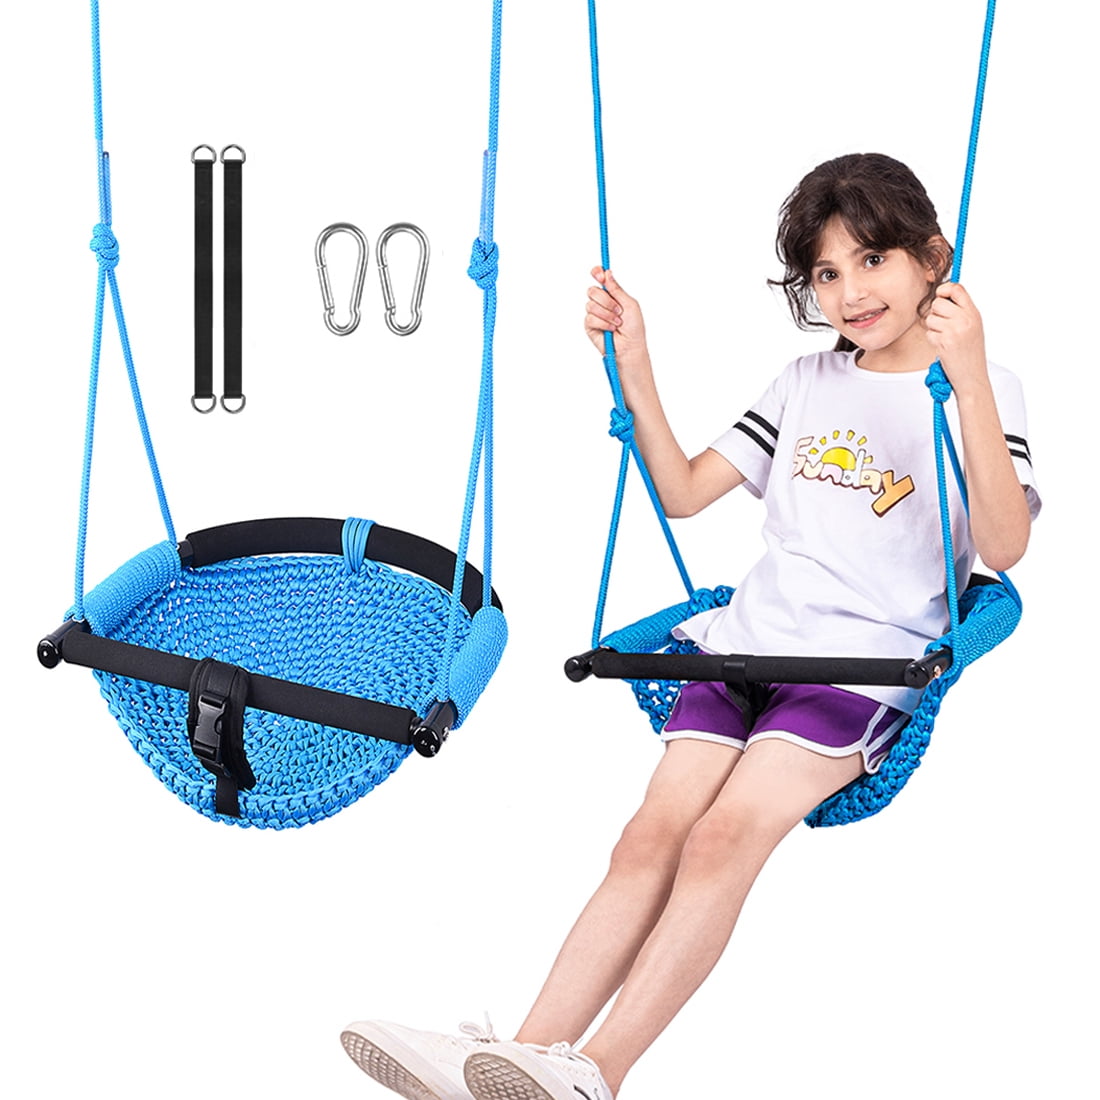 RedSwing Tree Disc Swing for Kids with Adjustable Rope Bonus Hanging Strap Green Rope Swing Seat for Outdoor Indoor Swingset Accessory 